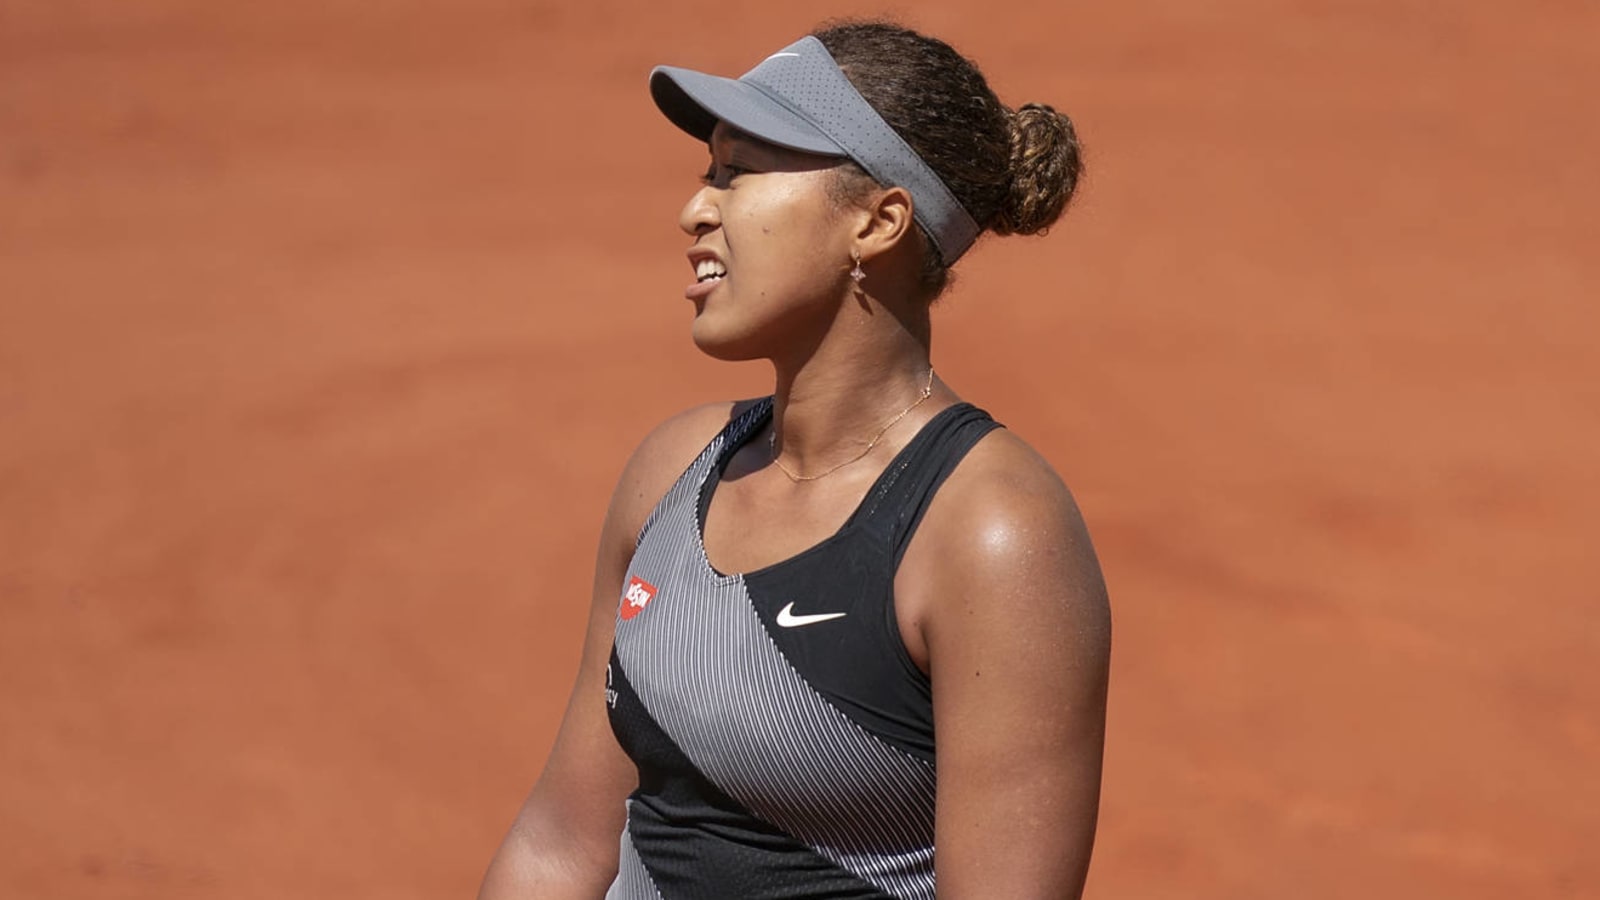 French Open organizers defend stance in handling of Naomi Osaka